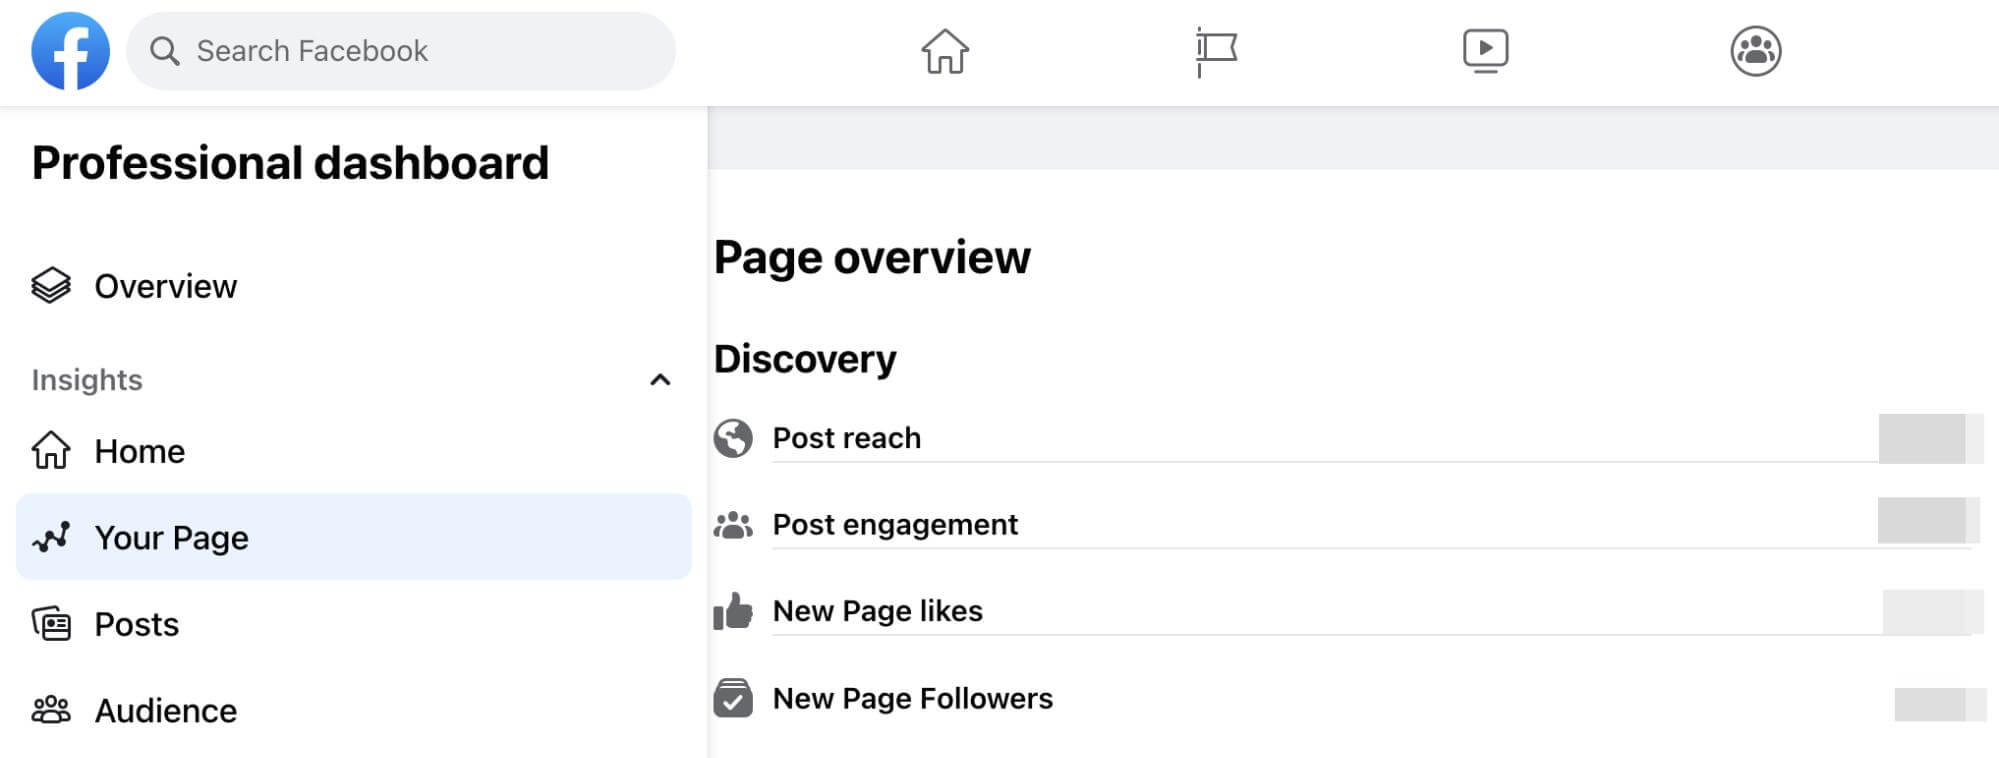 how-to-find-page-insights-for-the-new-pages-experience-on-facebook-npe-professional-dashboard-overview-tab-engagement-for-the-past-twentyeight-days-example-21